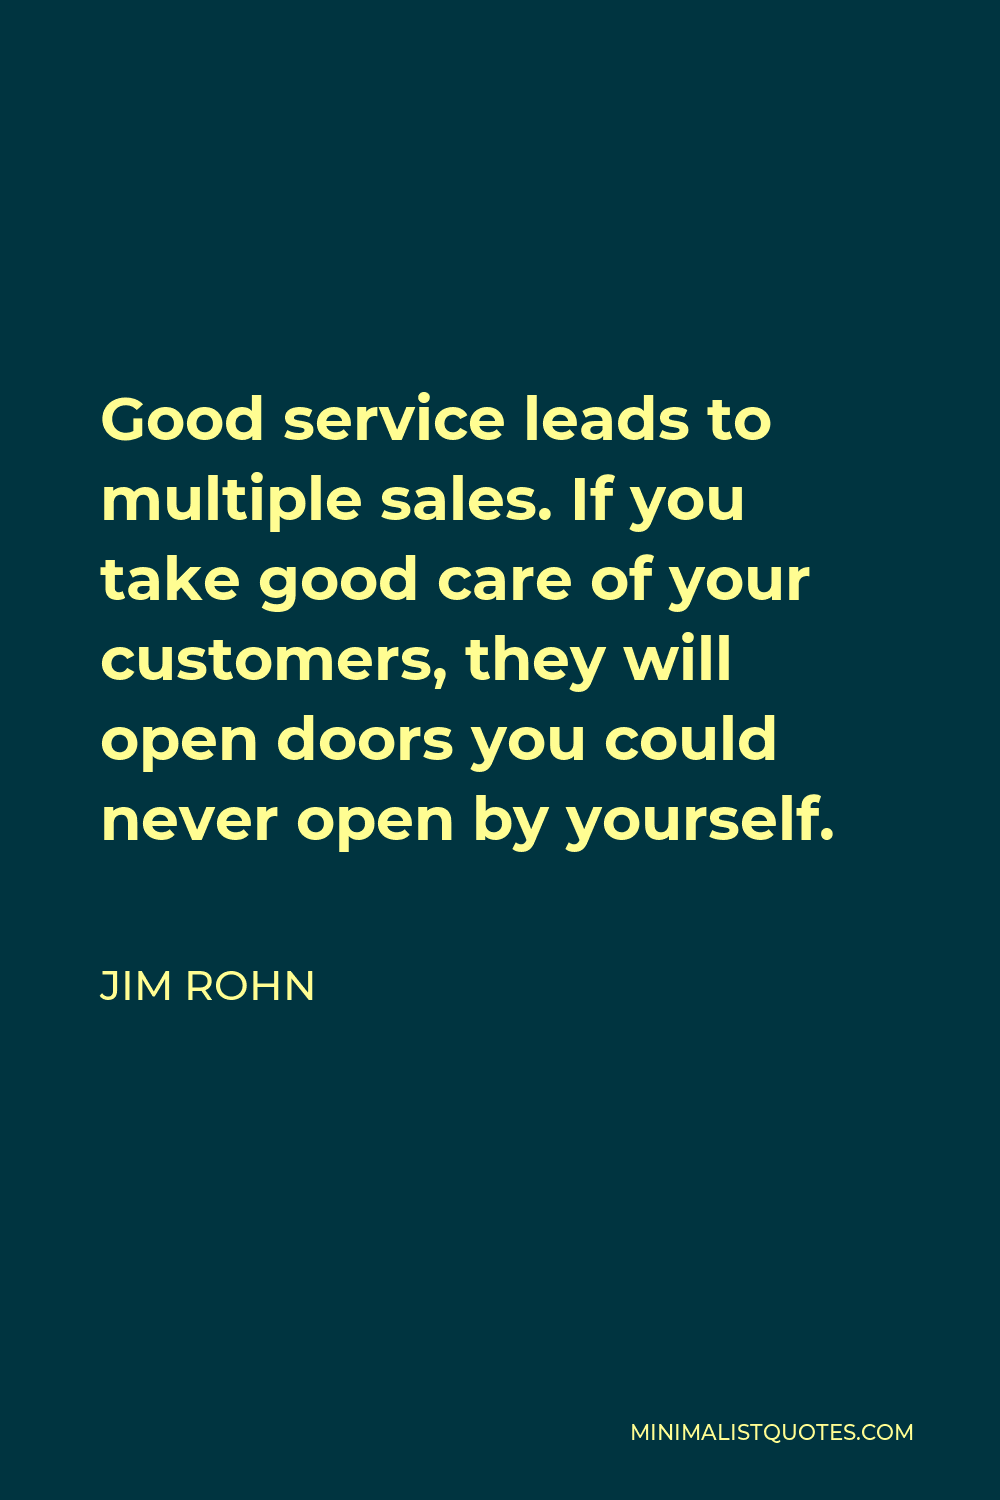 Jim Rohn Quote - Good service leads to multiple sales. If you take good care of your customers, they will open doors you could never open by yourself.